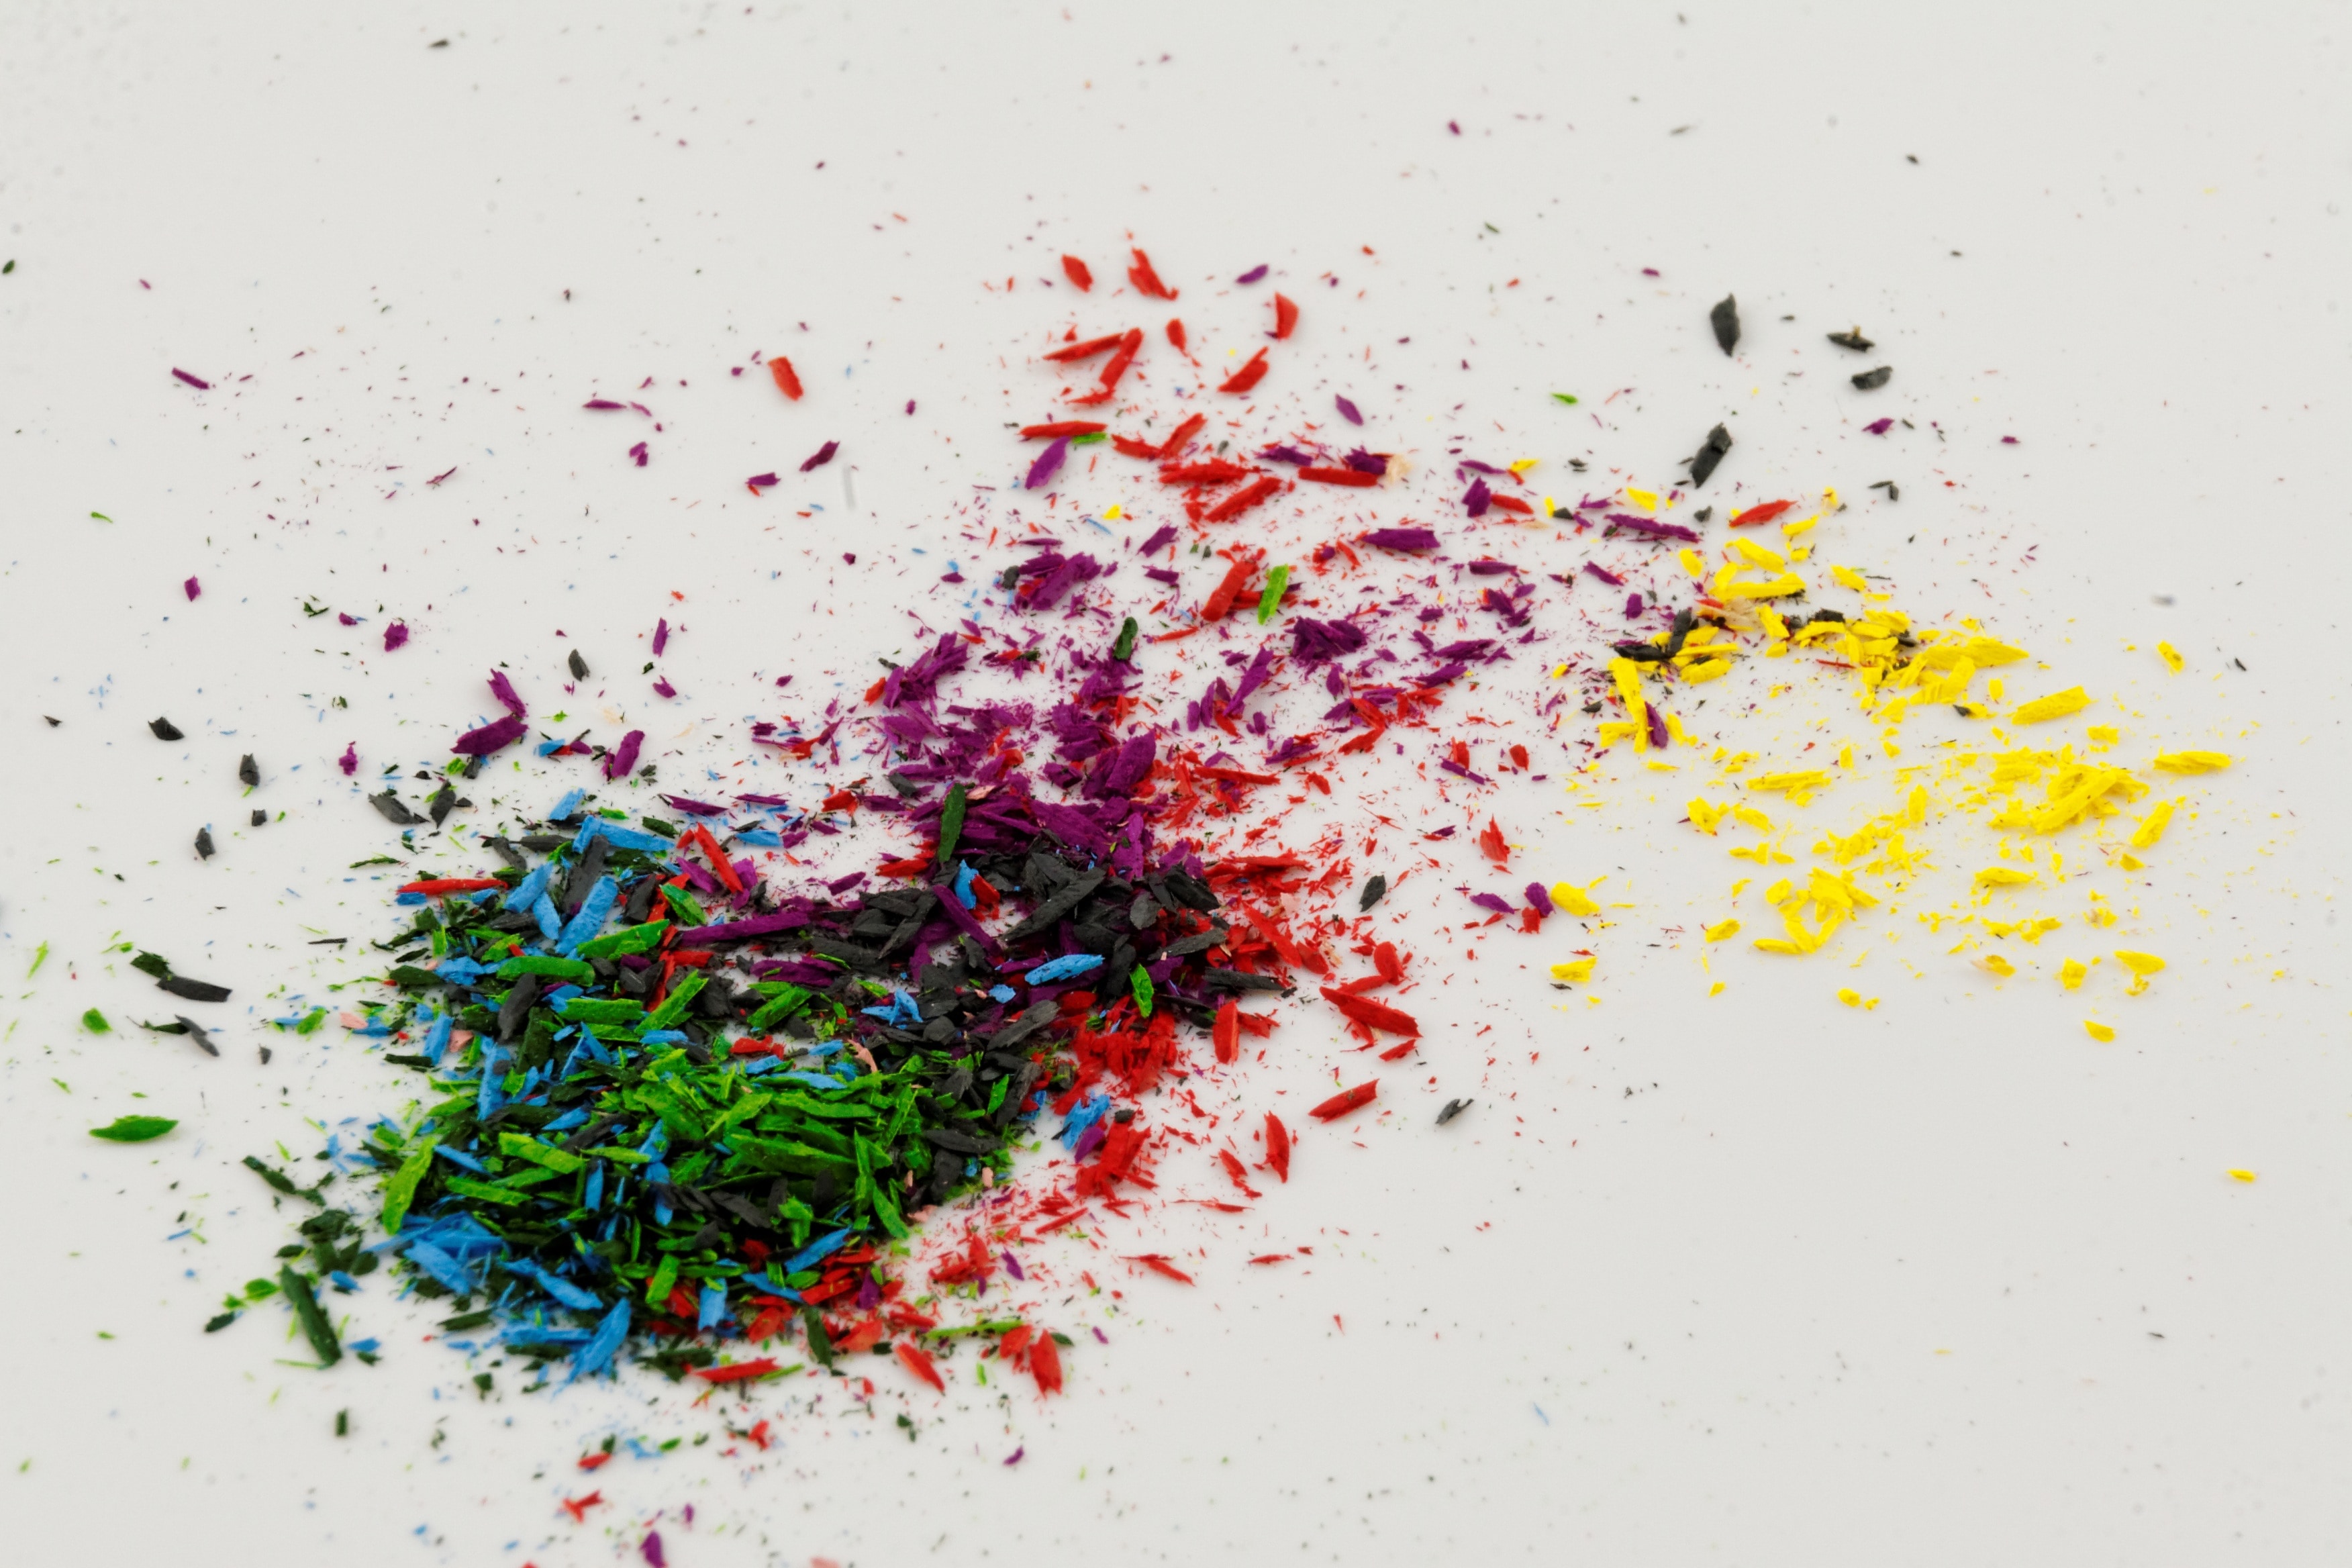 assorted color of powder on white surface